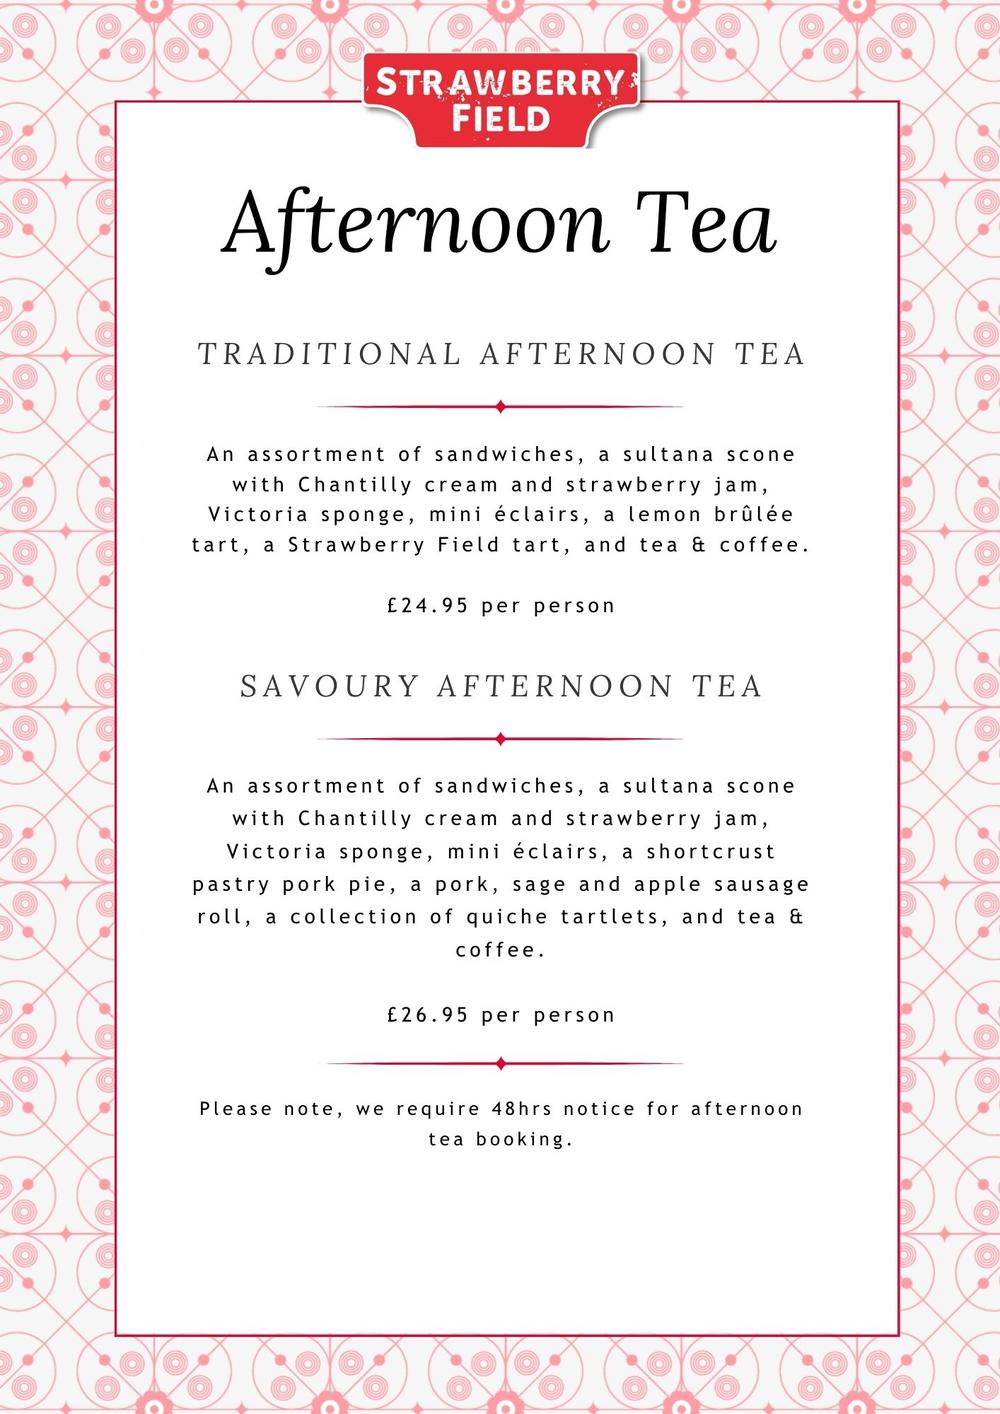 Strawberry Field Afternoon Tea menu for the Imagine More Cafe